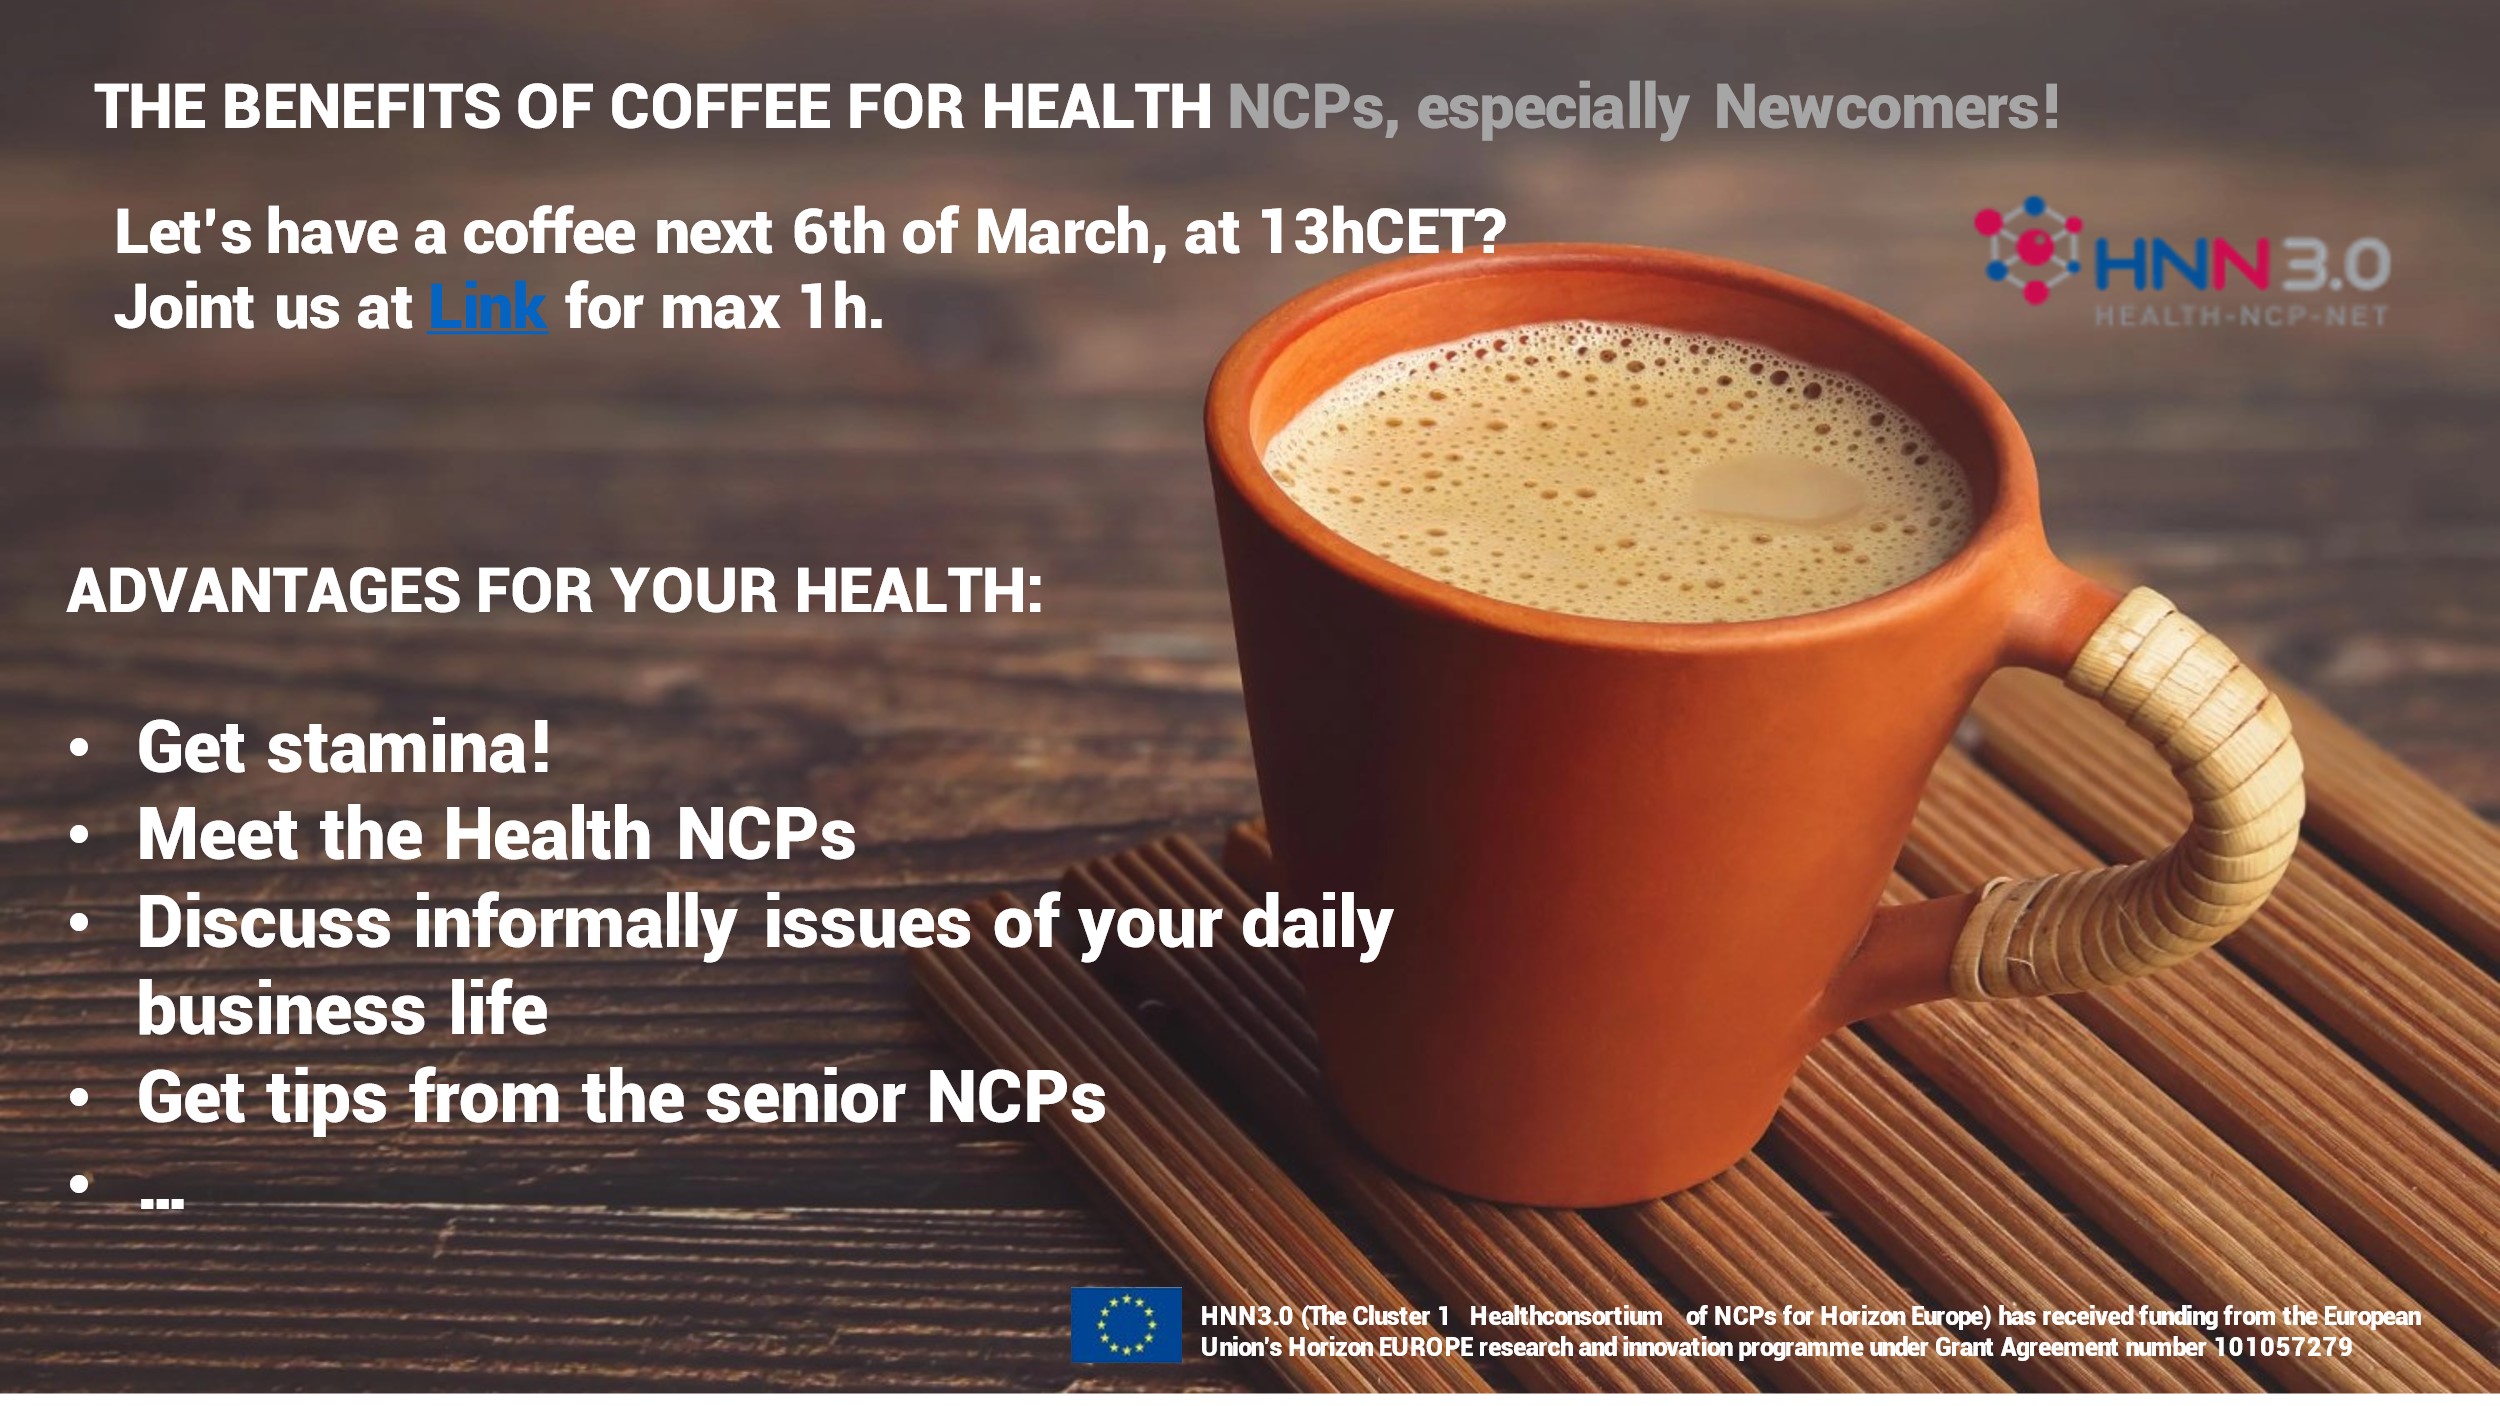 Coffee for NCPs